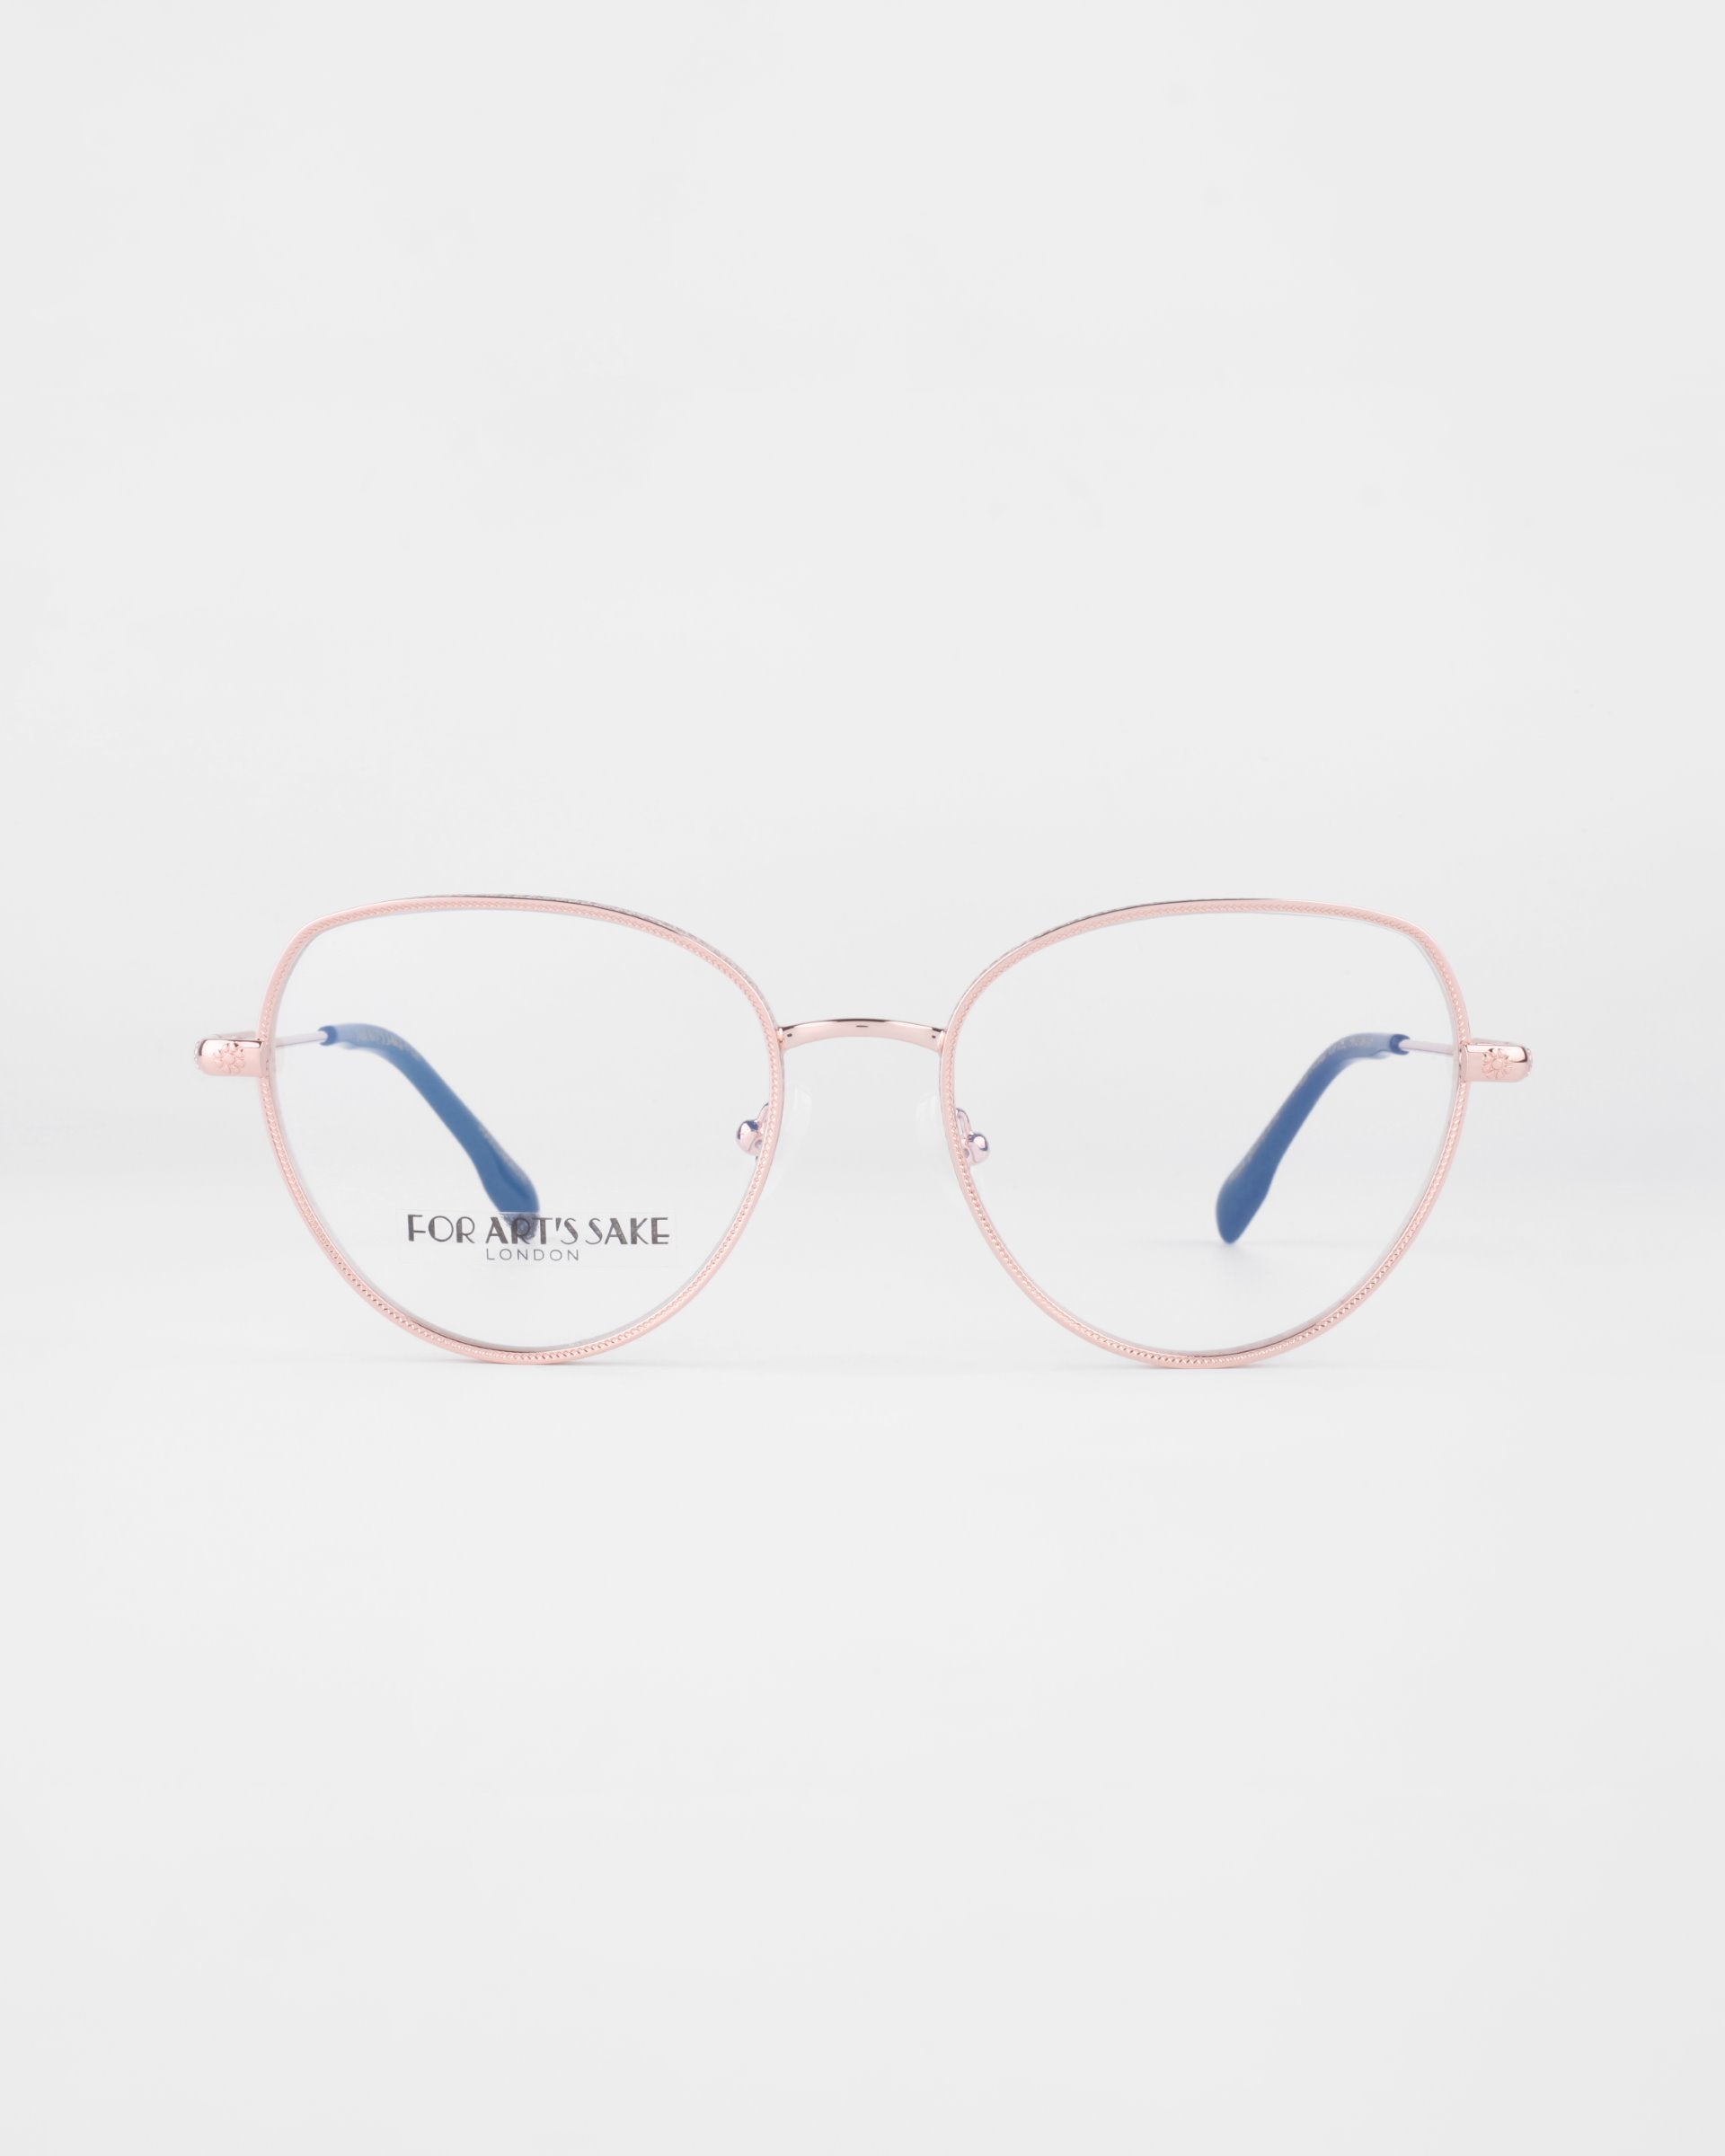 A pair of Frida Floral eyeglasses from For Art&#39;s Sake® with pink metal frames and round lenses on a plain white background. The earpieces are slender and slightly curved. Featuring 18-karat gold-plated frames, the words &quot;FOR ART&#39;S SAKE&quot; are visible on the inner side of the right lens.